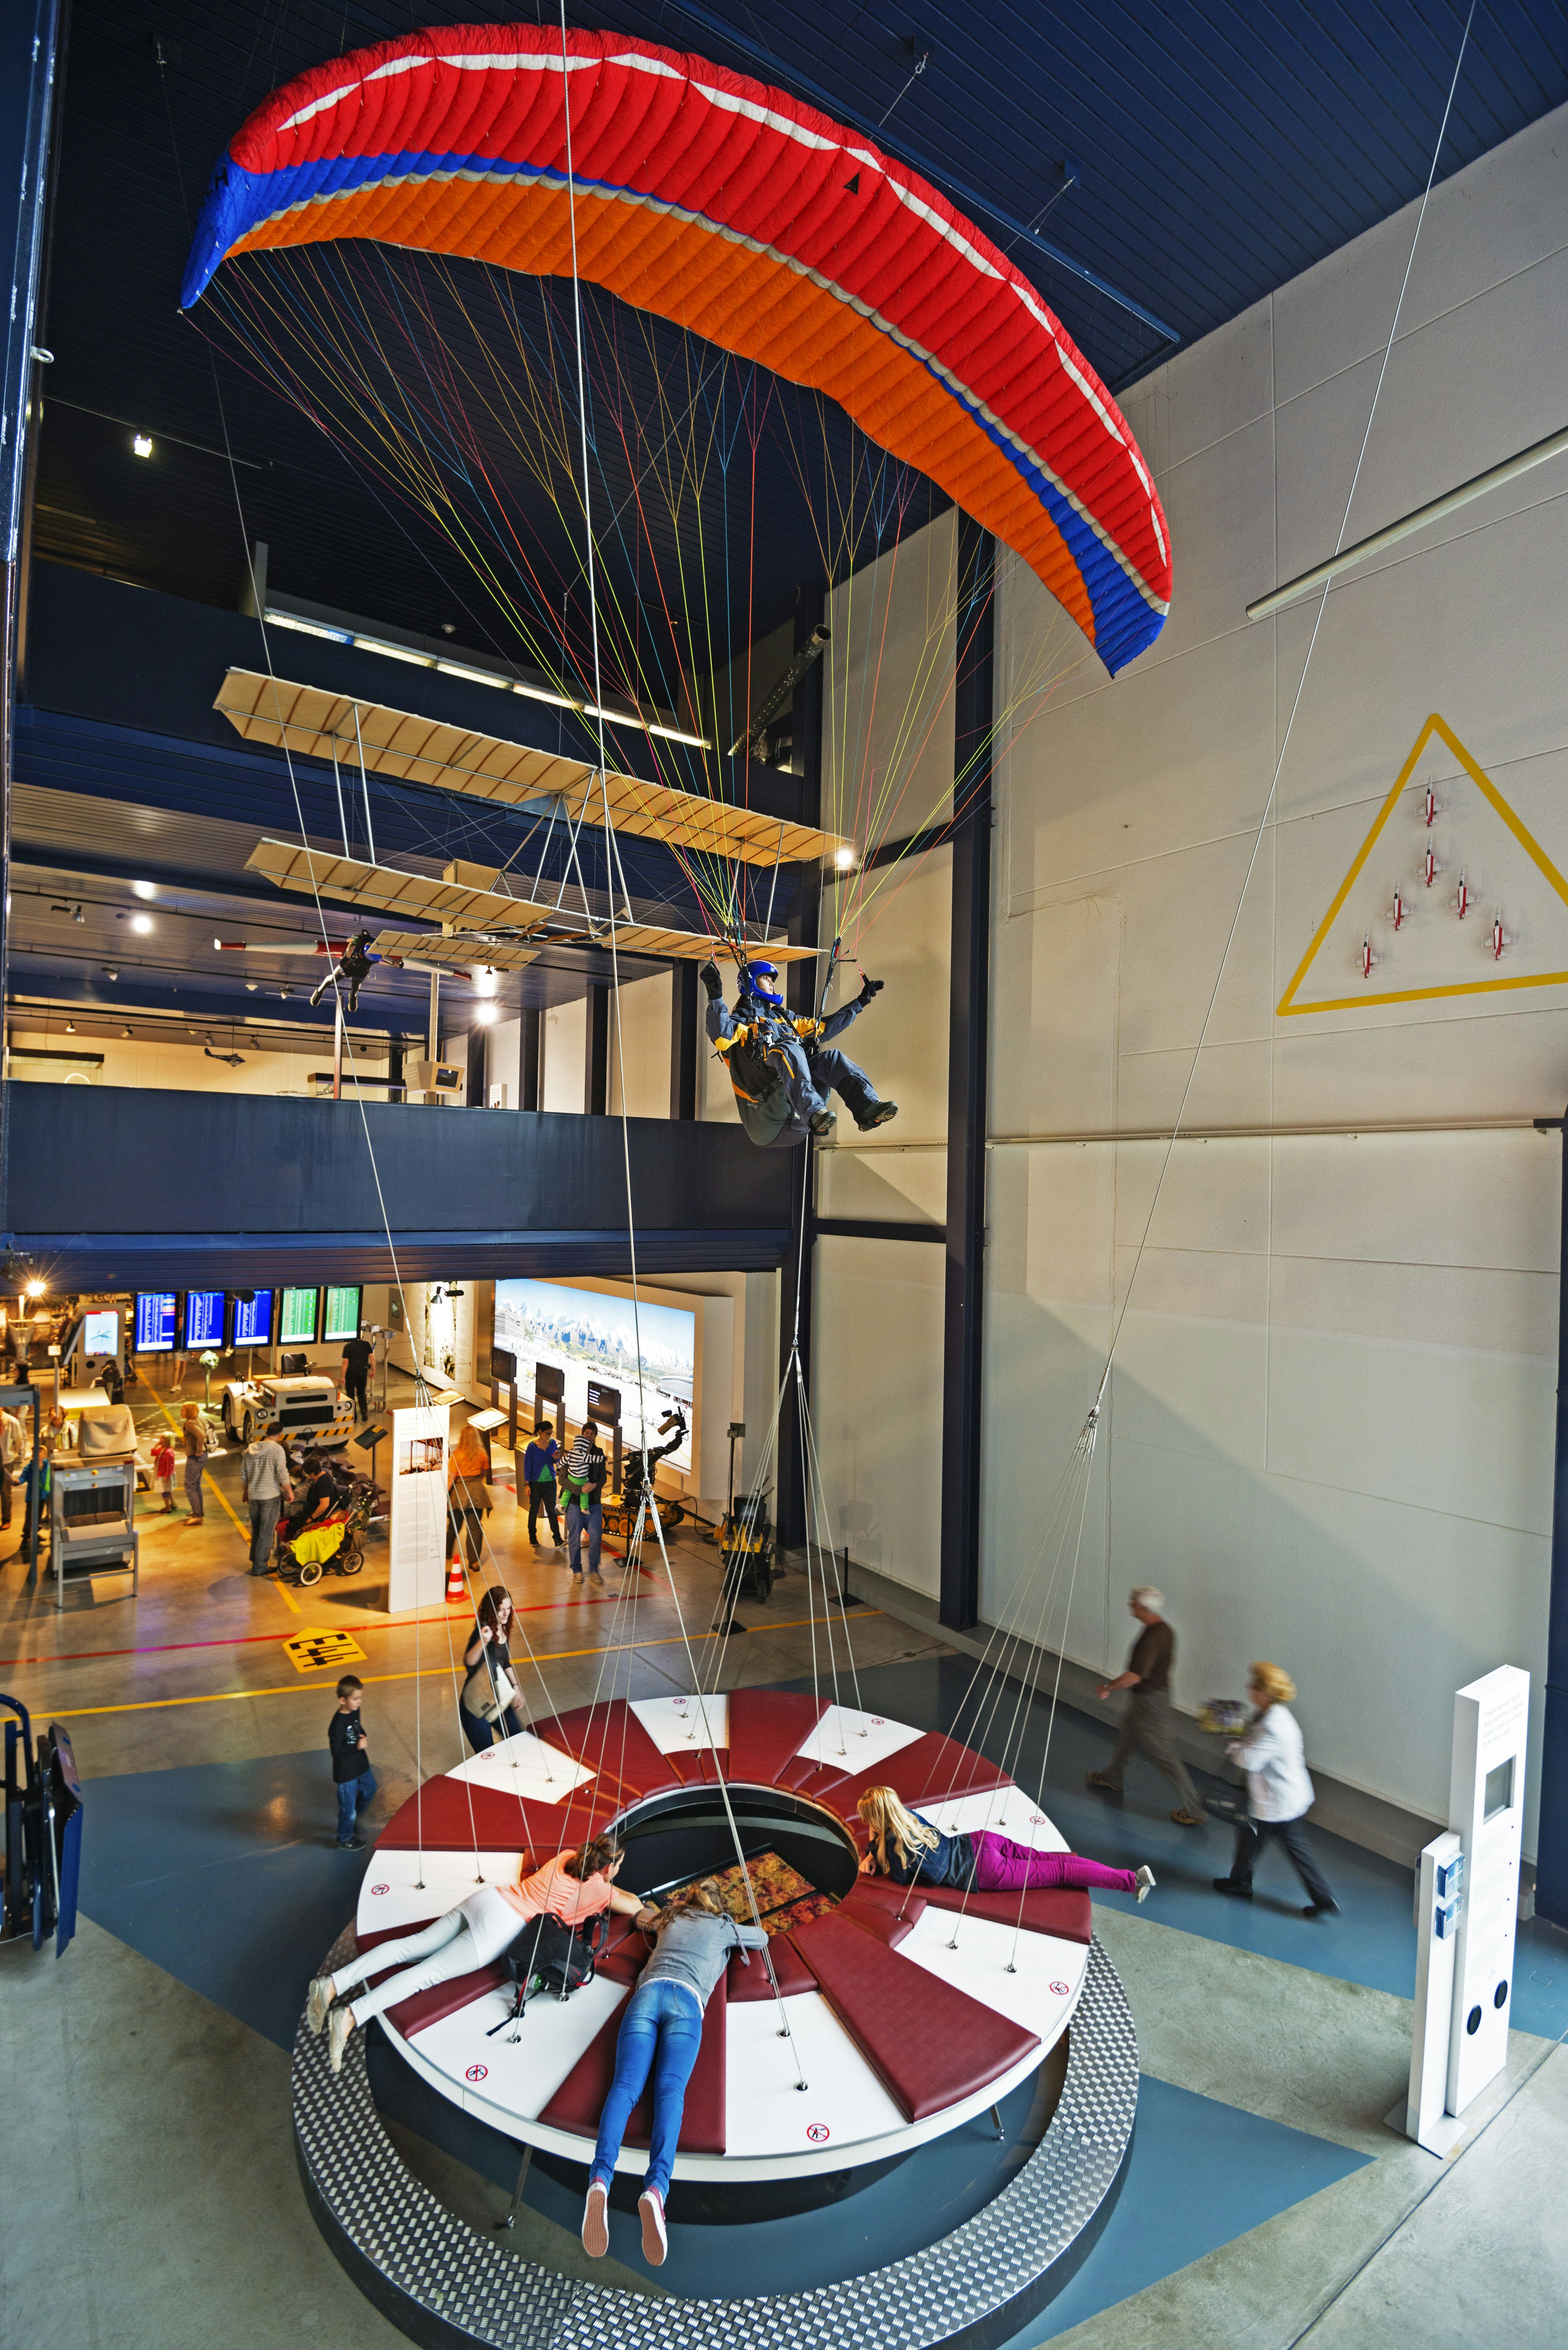 A model of a paraglider with a bright red sail attached with blue tips, hangs from the ceiling of the Transport Museum in Switzerland with a mannequin installed to look like a pilot. Behind, a light wood primitive bi-wing plane also hangs from the ceiling